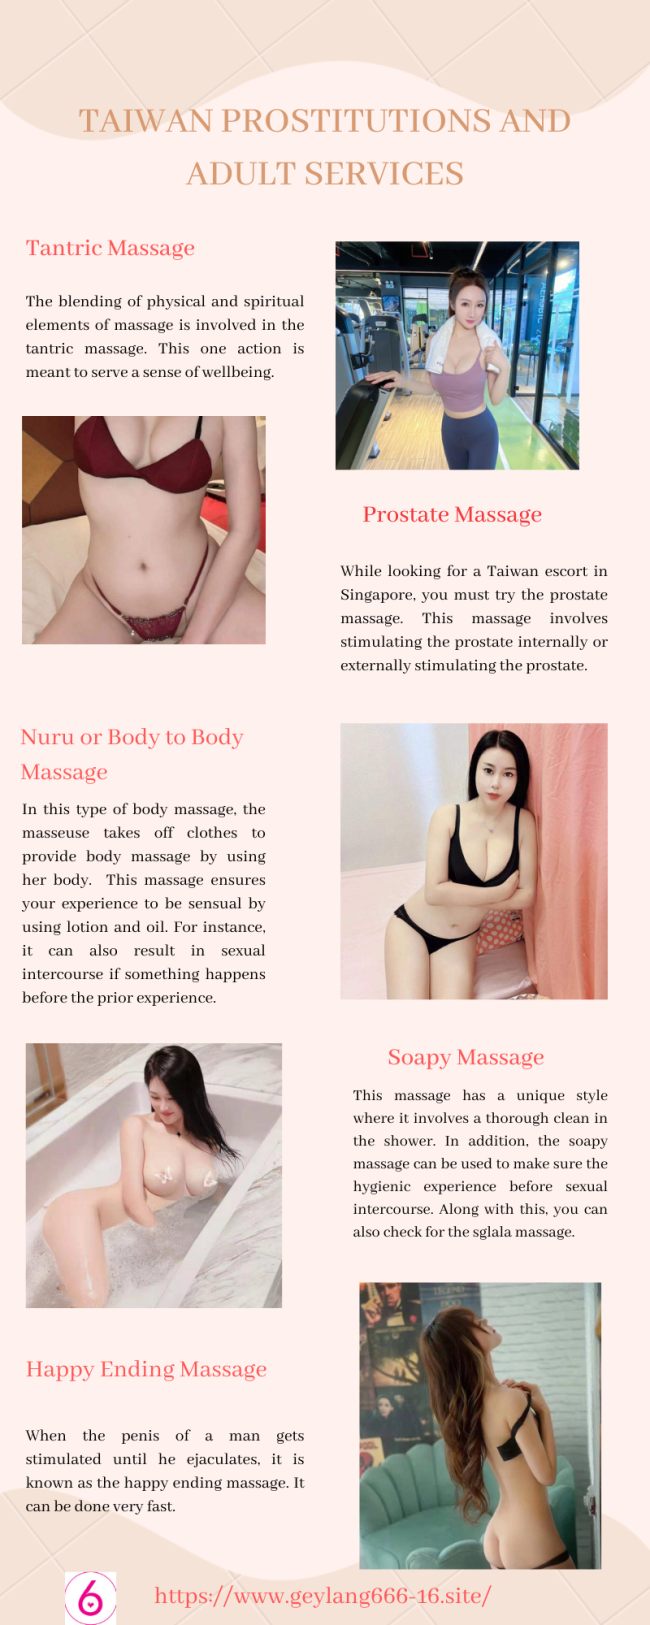 Taiwan-Prostitutions-And-Adult-Services502366c7a80c4f64.png